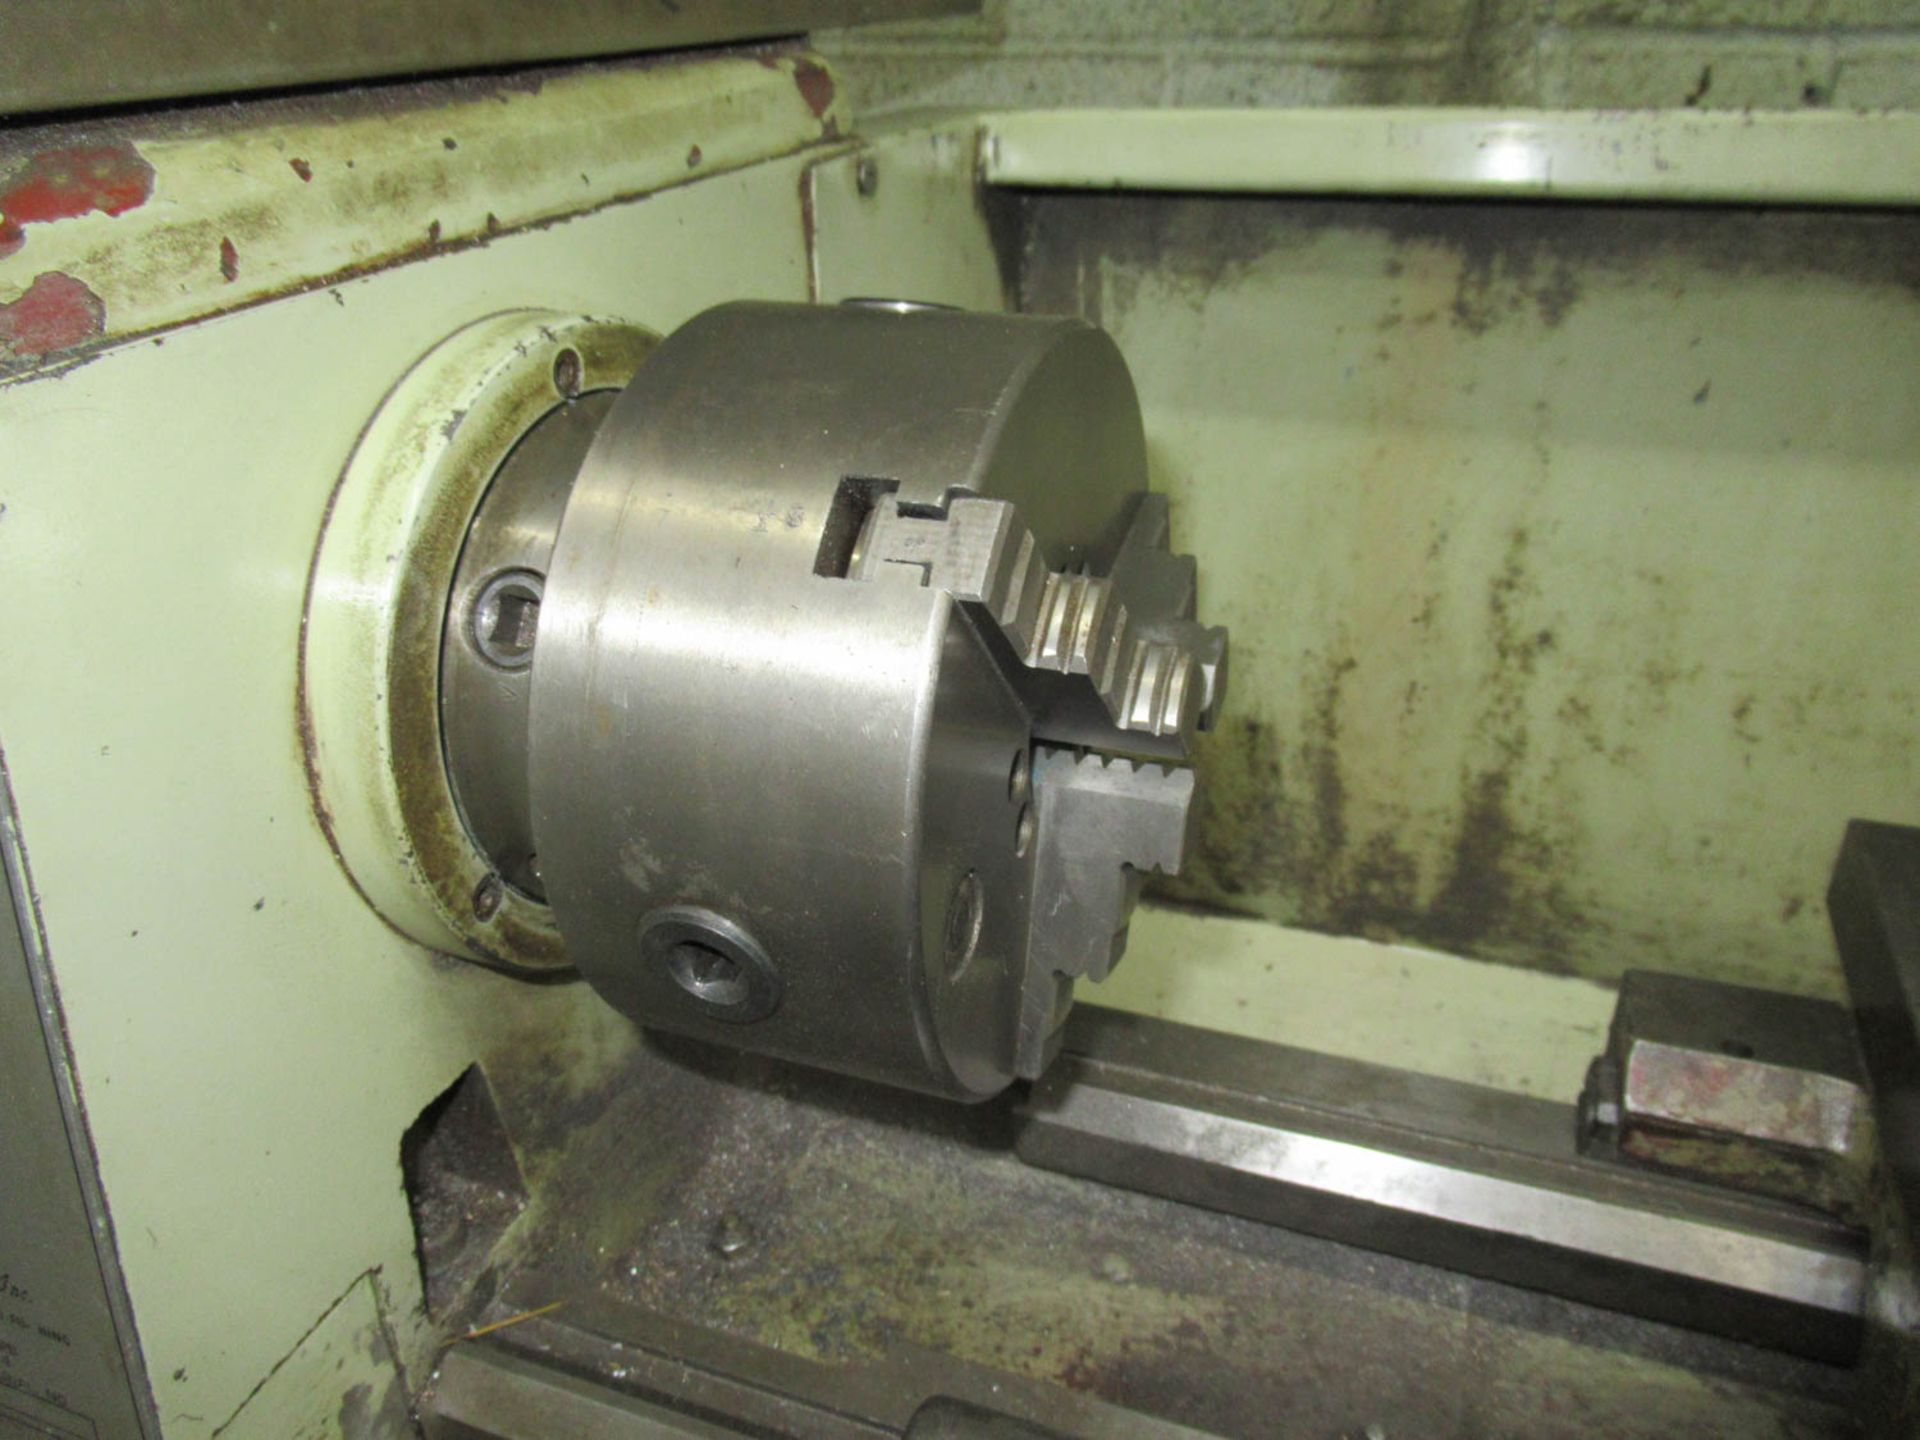 12" X 30" GALLIN MDL. 3601 LATHE, INCH / METRIC THREADING, 8-SPINDLE SPEEDS, 105-2000 RPM, CAMLOC - Image 4 of 7